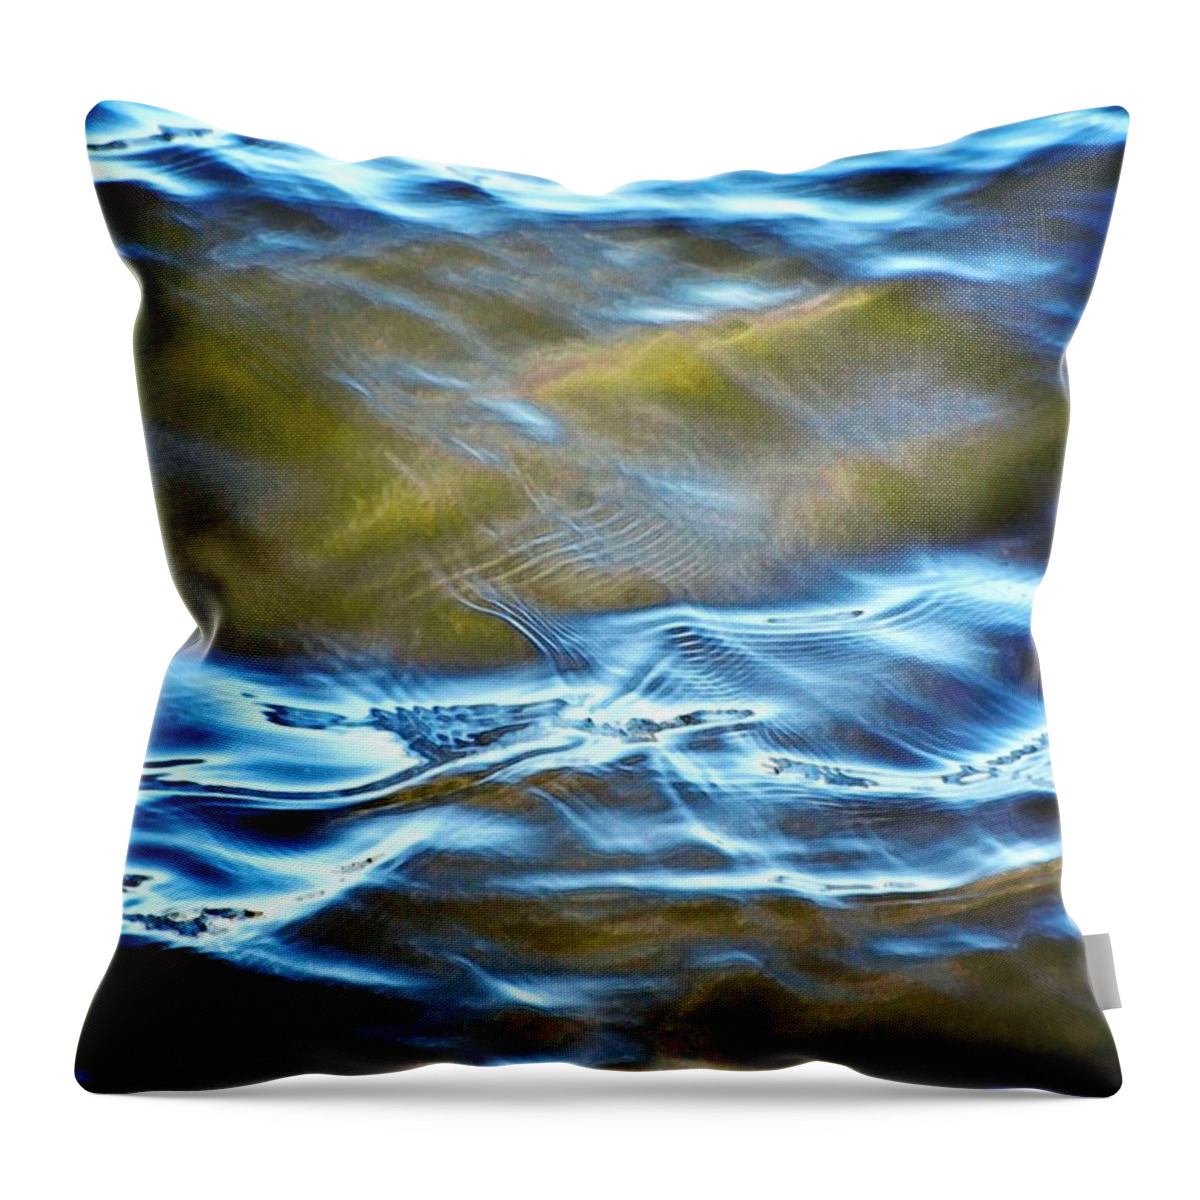 Water Throw Pillow featuring the digital art Illuminated  by Dale  Ford